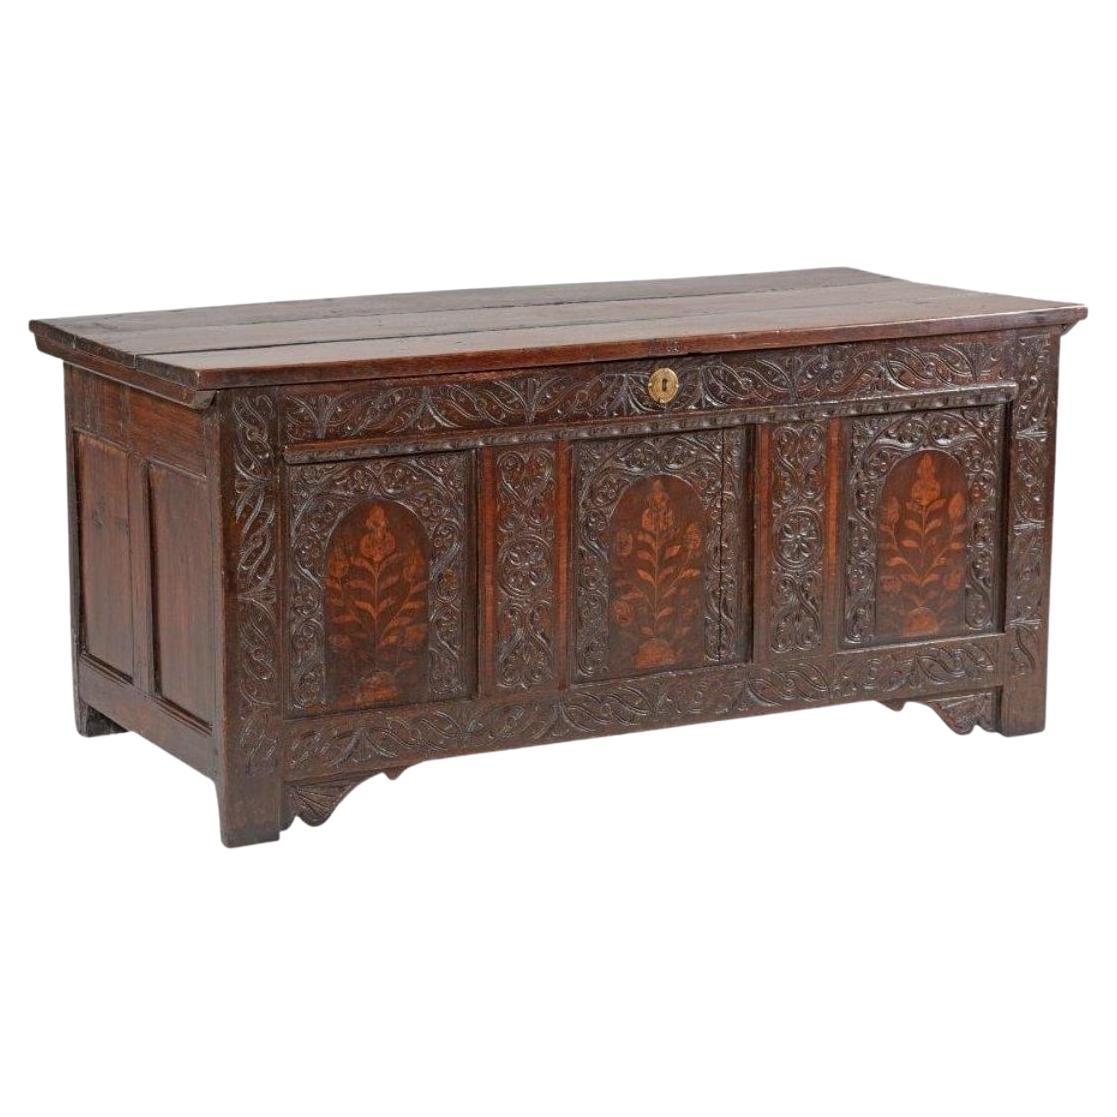 Late 18th Century English Carved Oak Blanket Chest For Sale